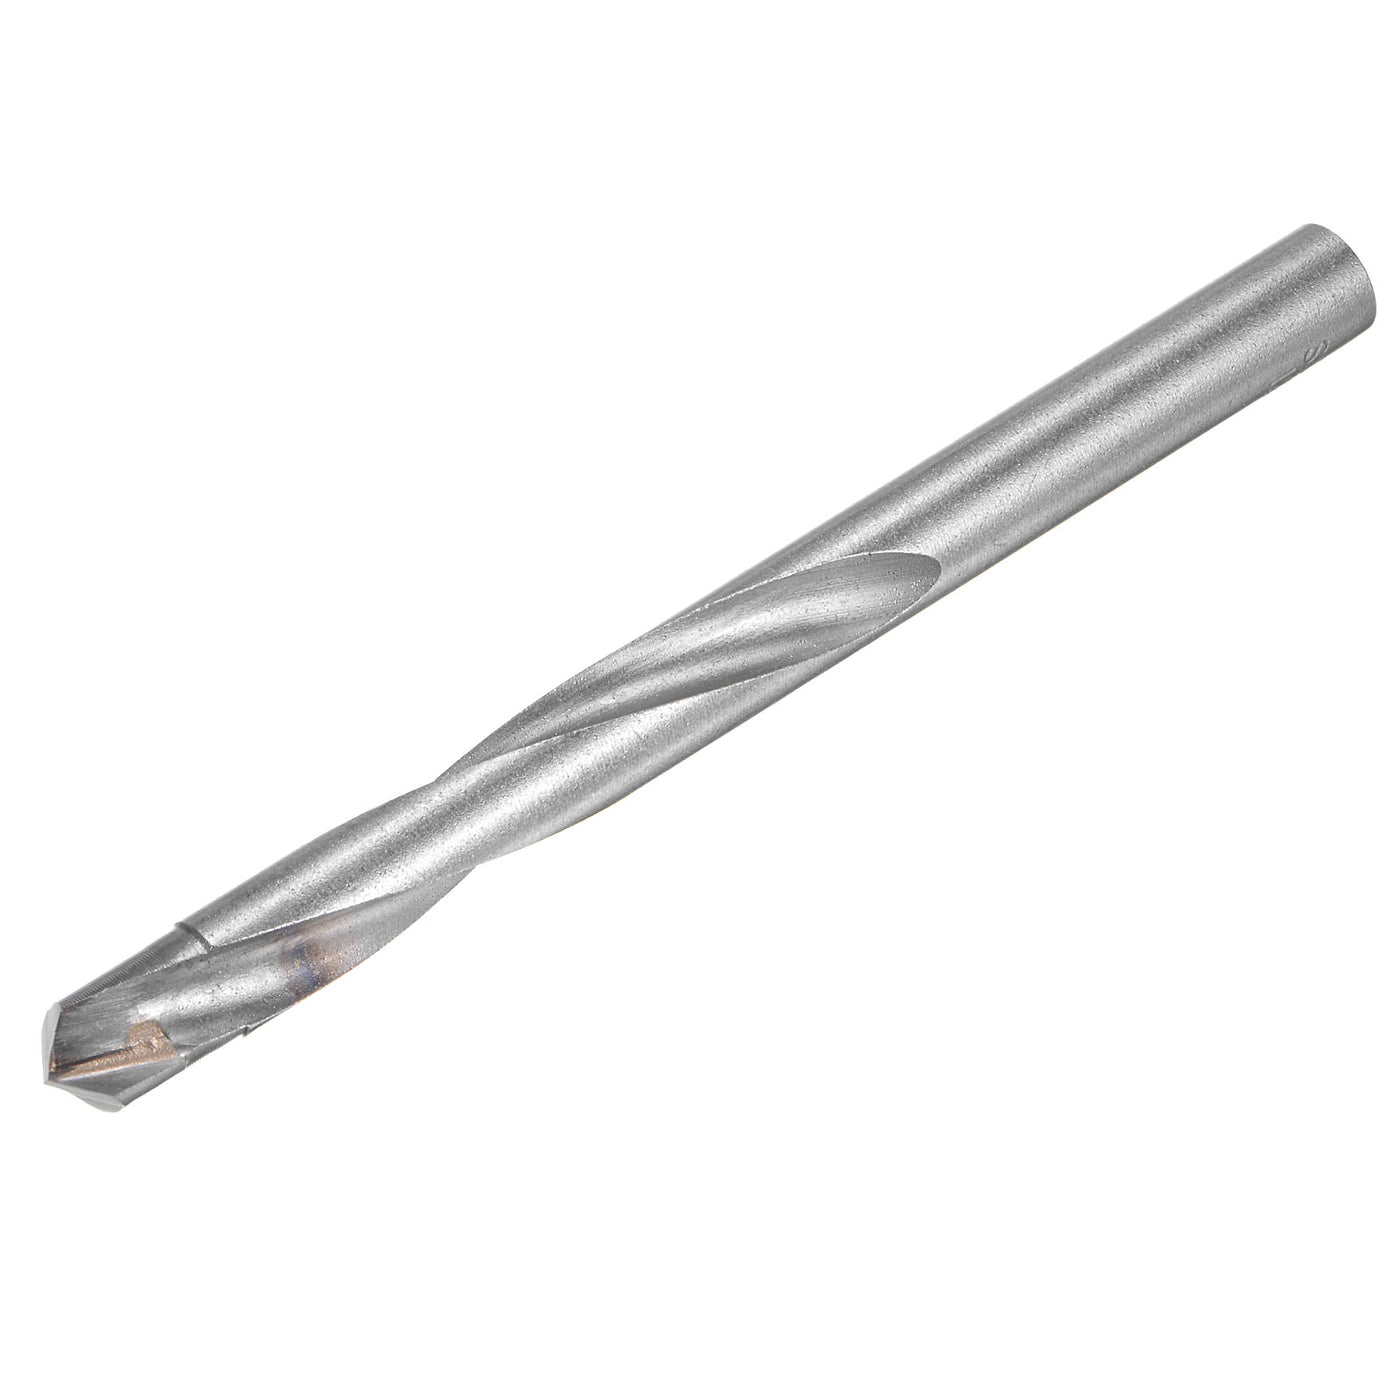 uxcell Uxcell 12mm Cutting Dia Round Shank Cemented Carbide Twist Drill Bit, 150mm Length